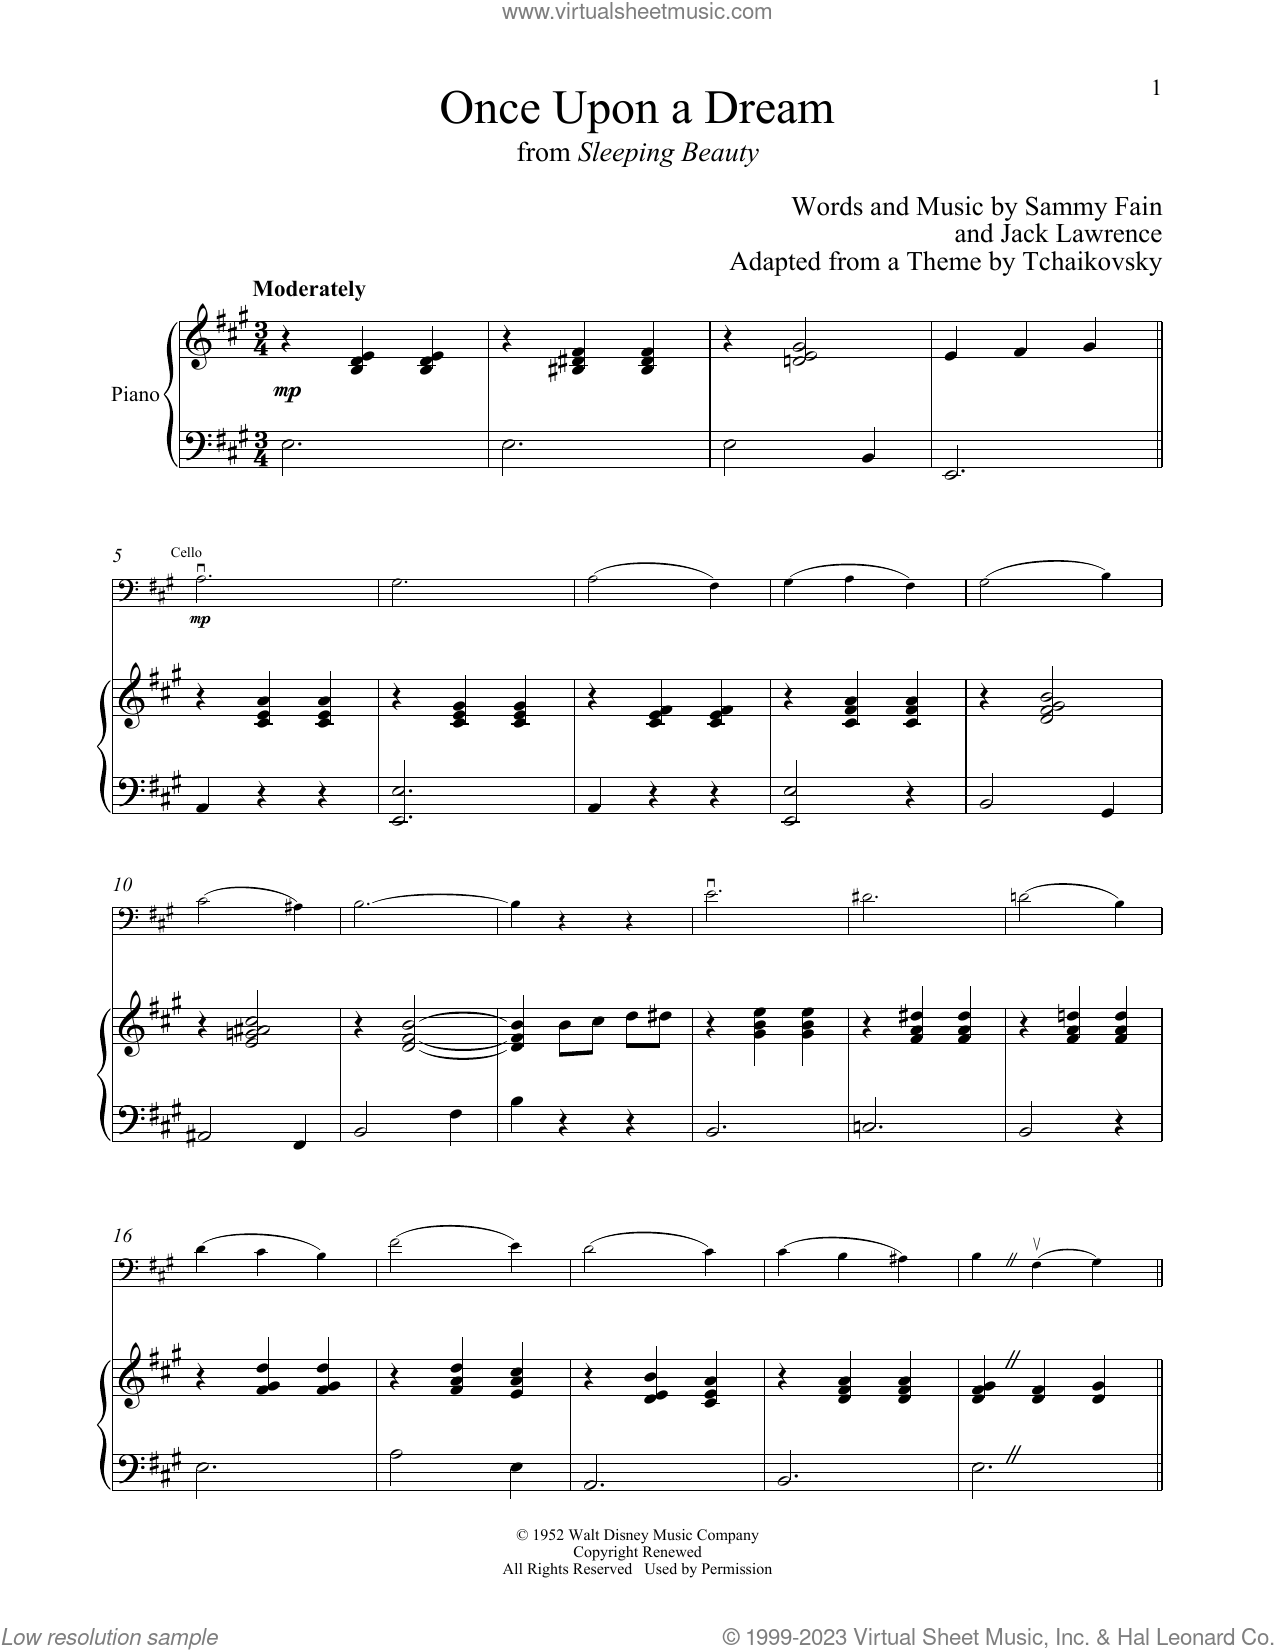 Once Upon A Dream (from Sleeping Beauty) sheet music for cello and piano